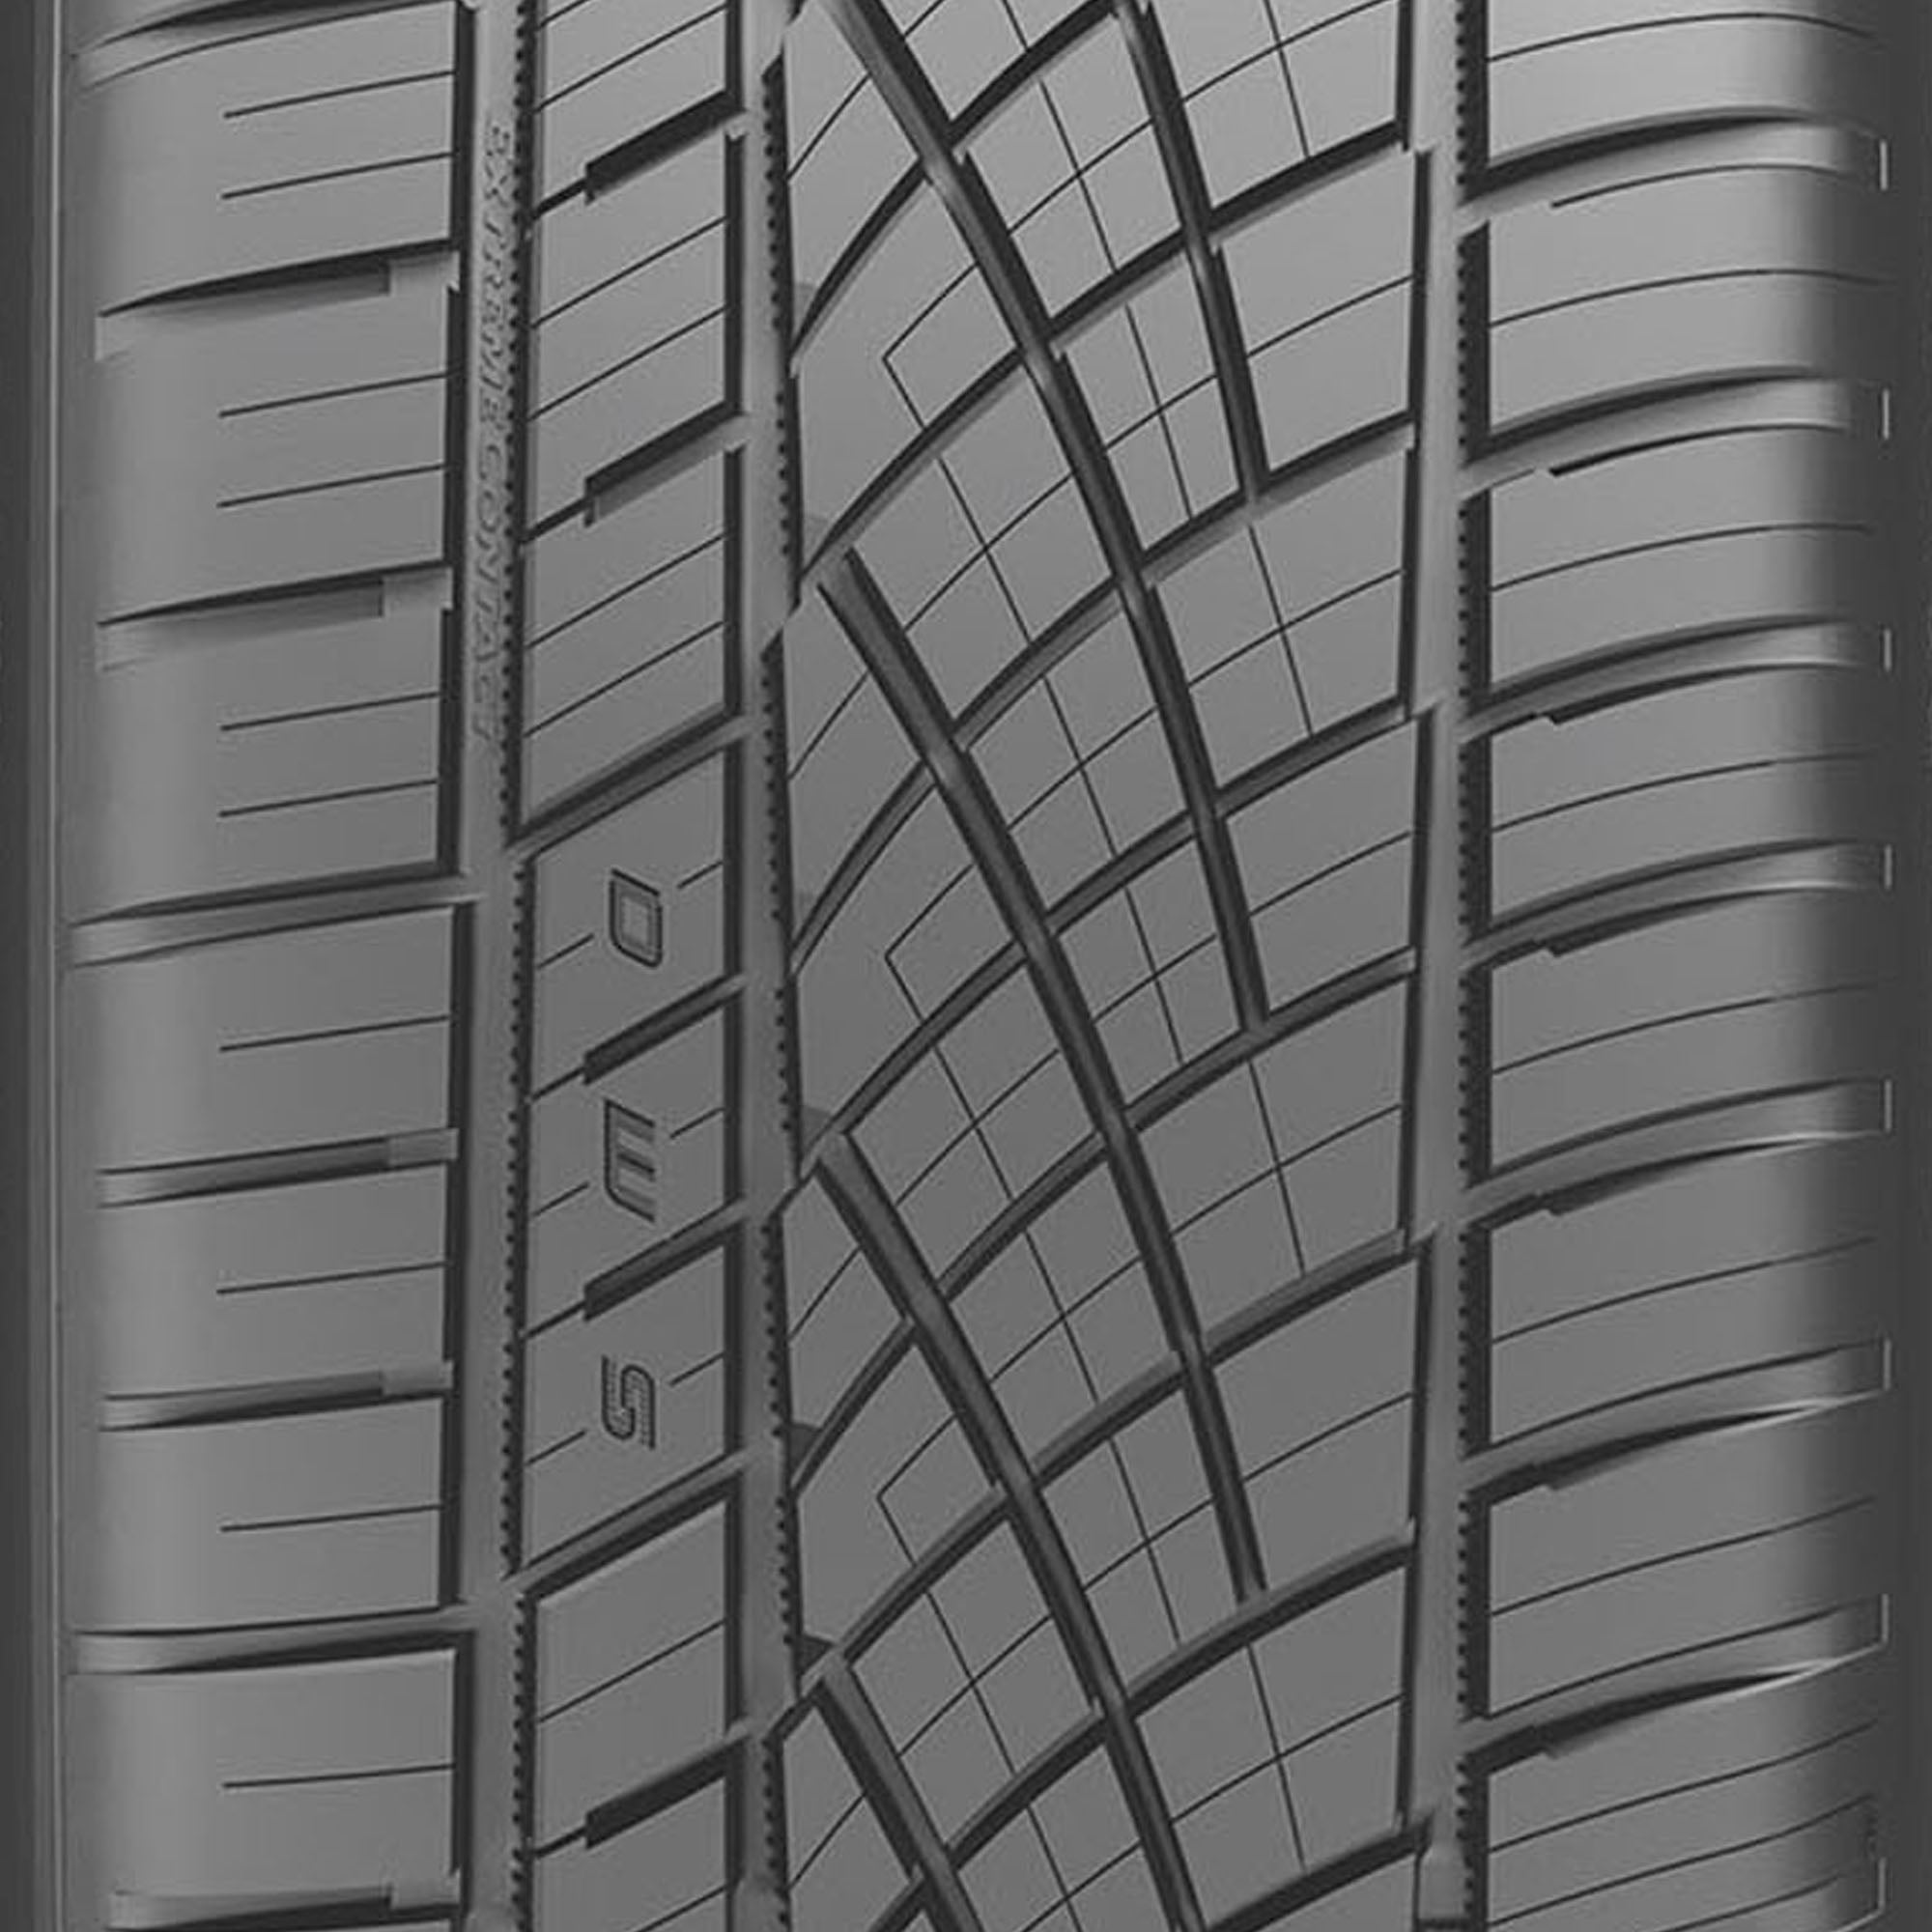 Continental ExtremeContact DWS06 PLUS All Season 265/40ZR18 101Y XL  Passenger Tire